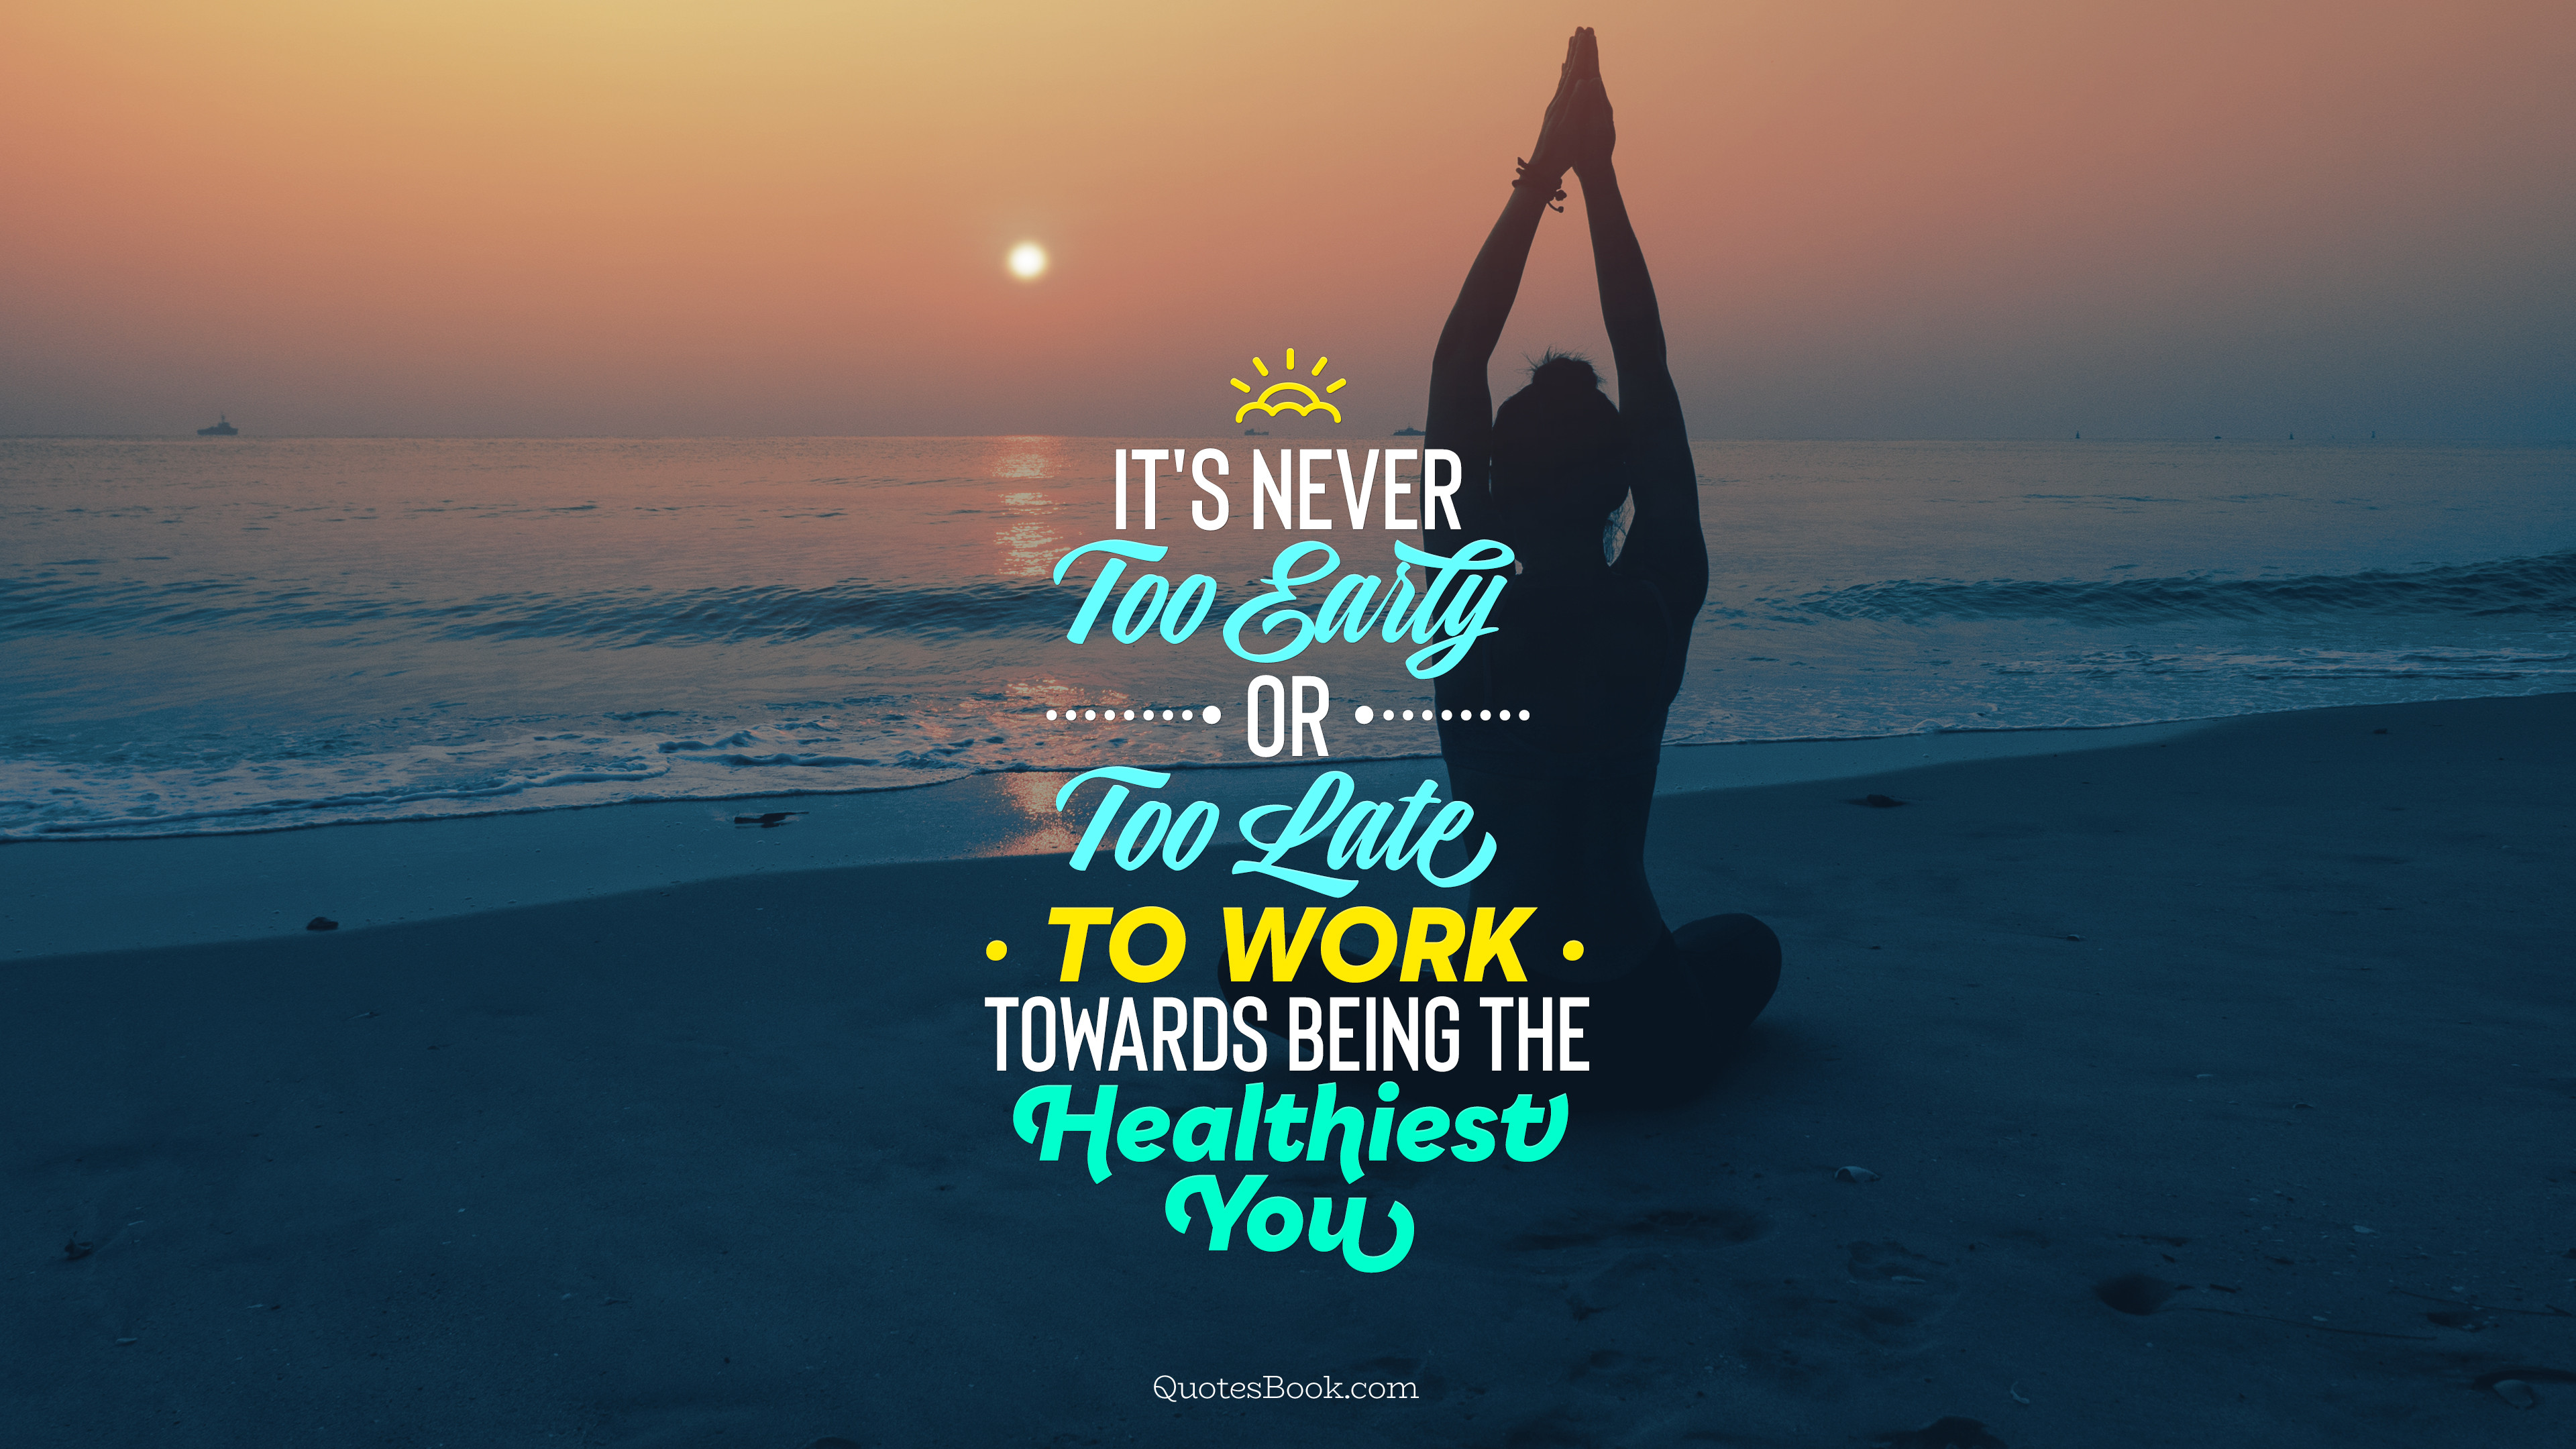 It S Never Too Early Or Too Late To Work Towards Being The Healthiest You Quotesbook